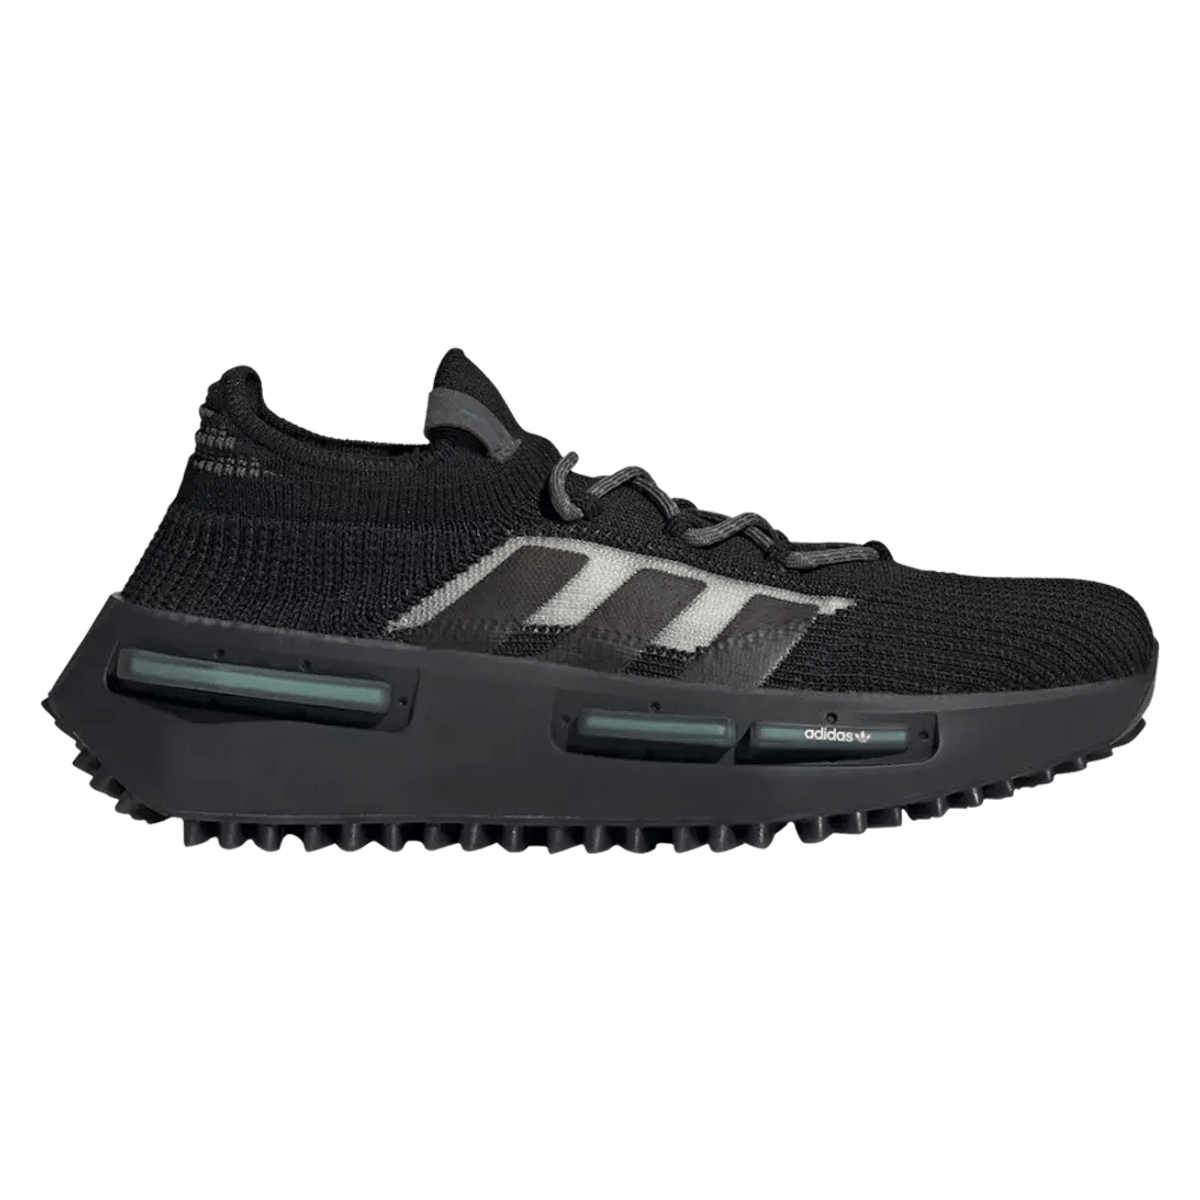 Adidas NMD_S1 "Black Altered Blue"